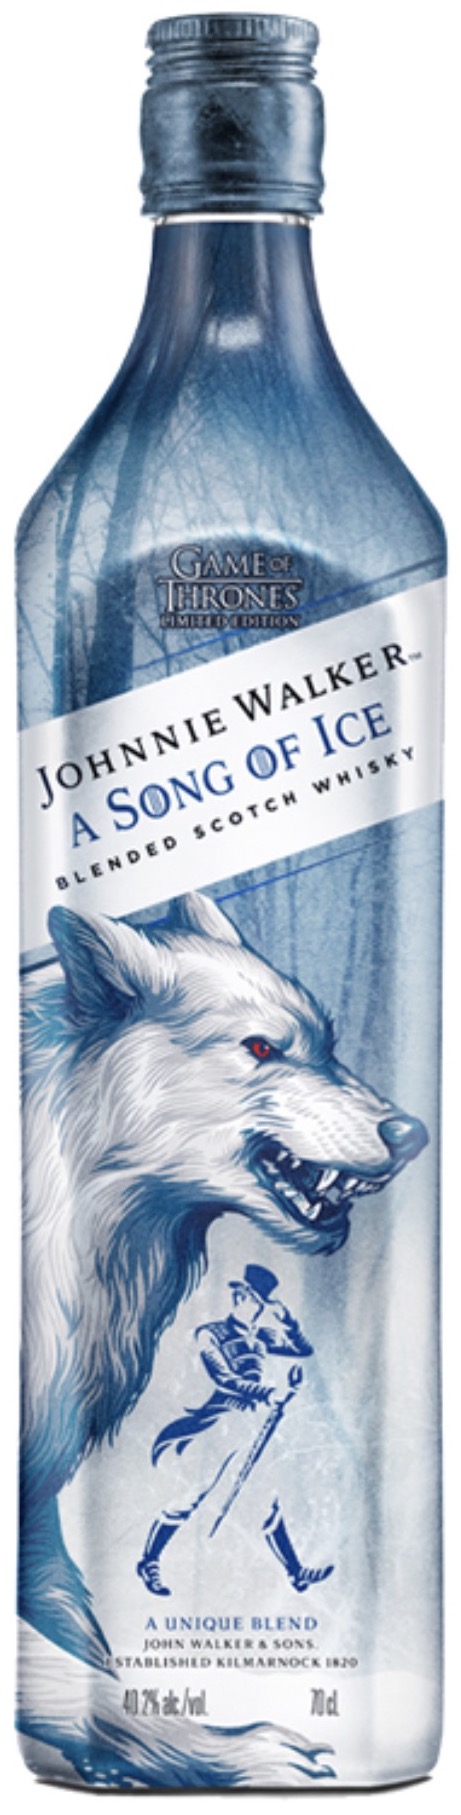 Johnnie Walker A Song of Ice Game of Thrones Blended Scotch Whisky 40,2 % vol. 0,7 L